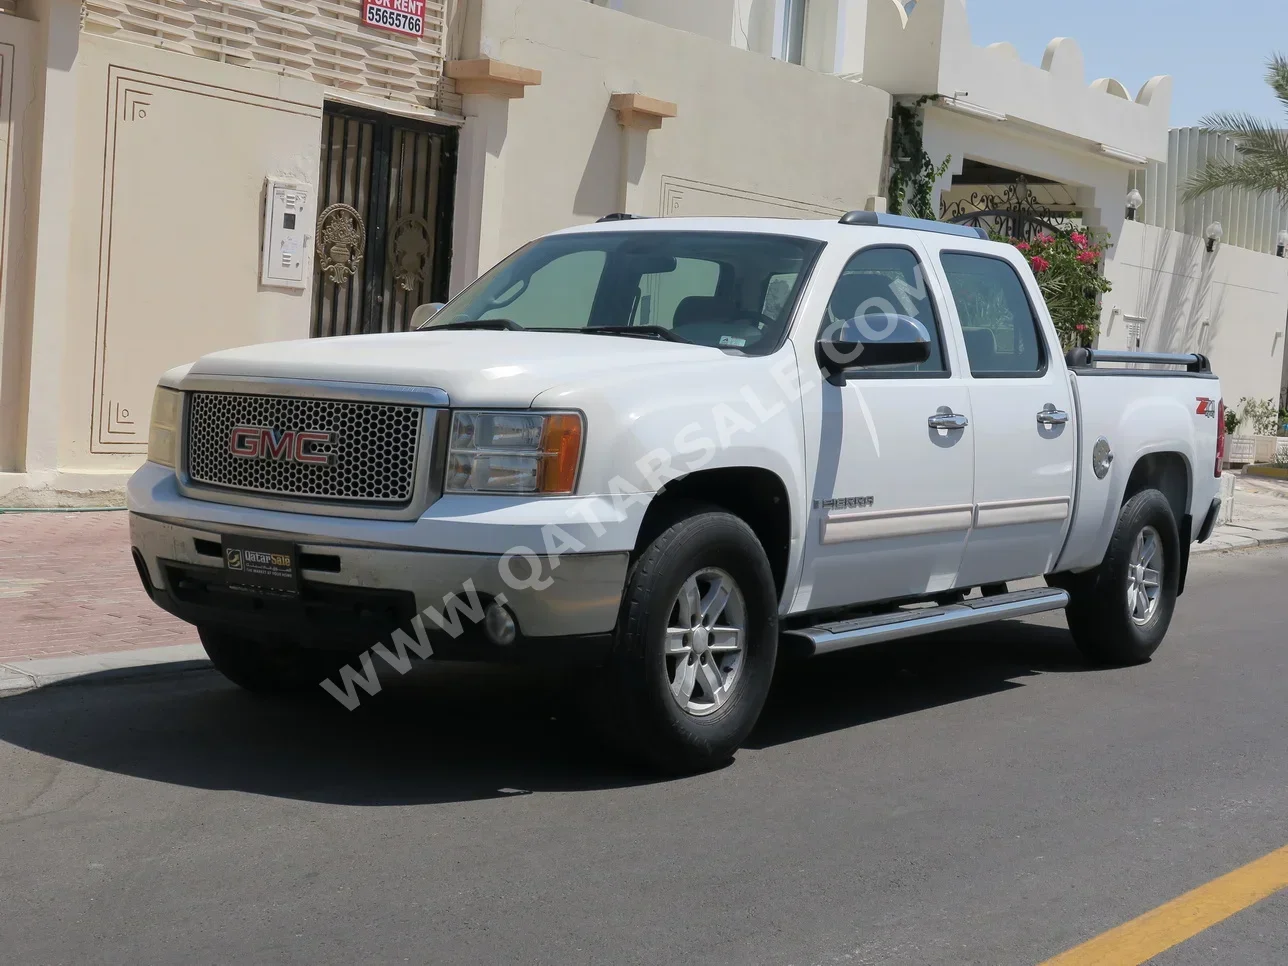 GMC  Sierra  2009  Automatic  177,000 Km  8 Cylinder  Four Wheel Drive (4WD)  Pick Up  White